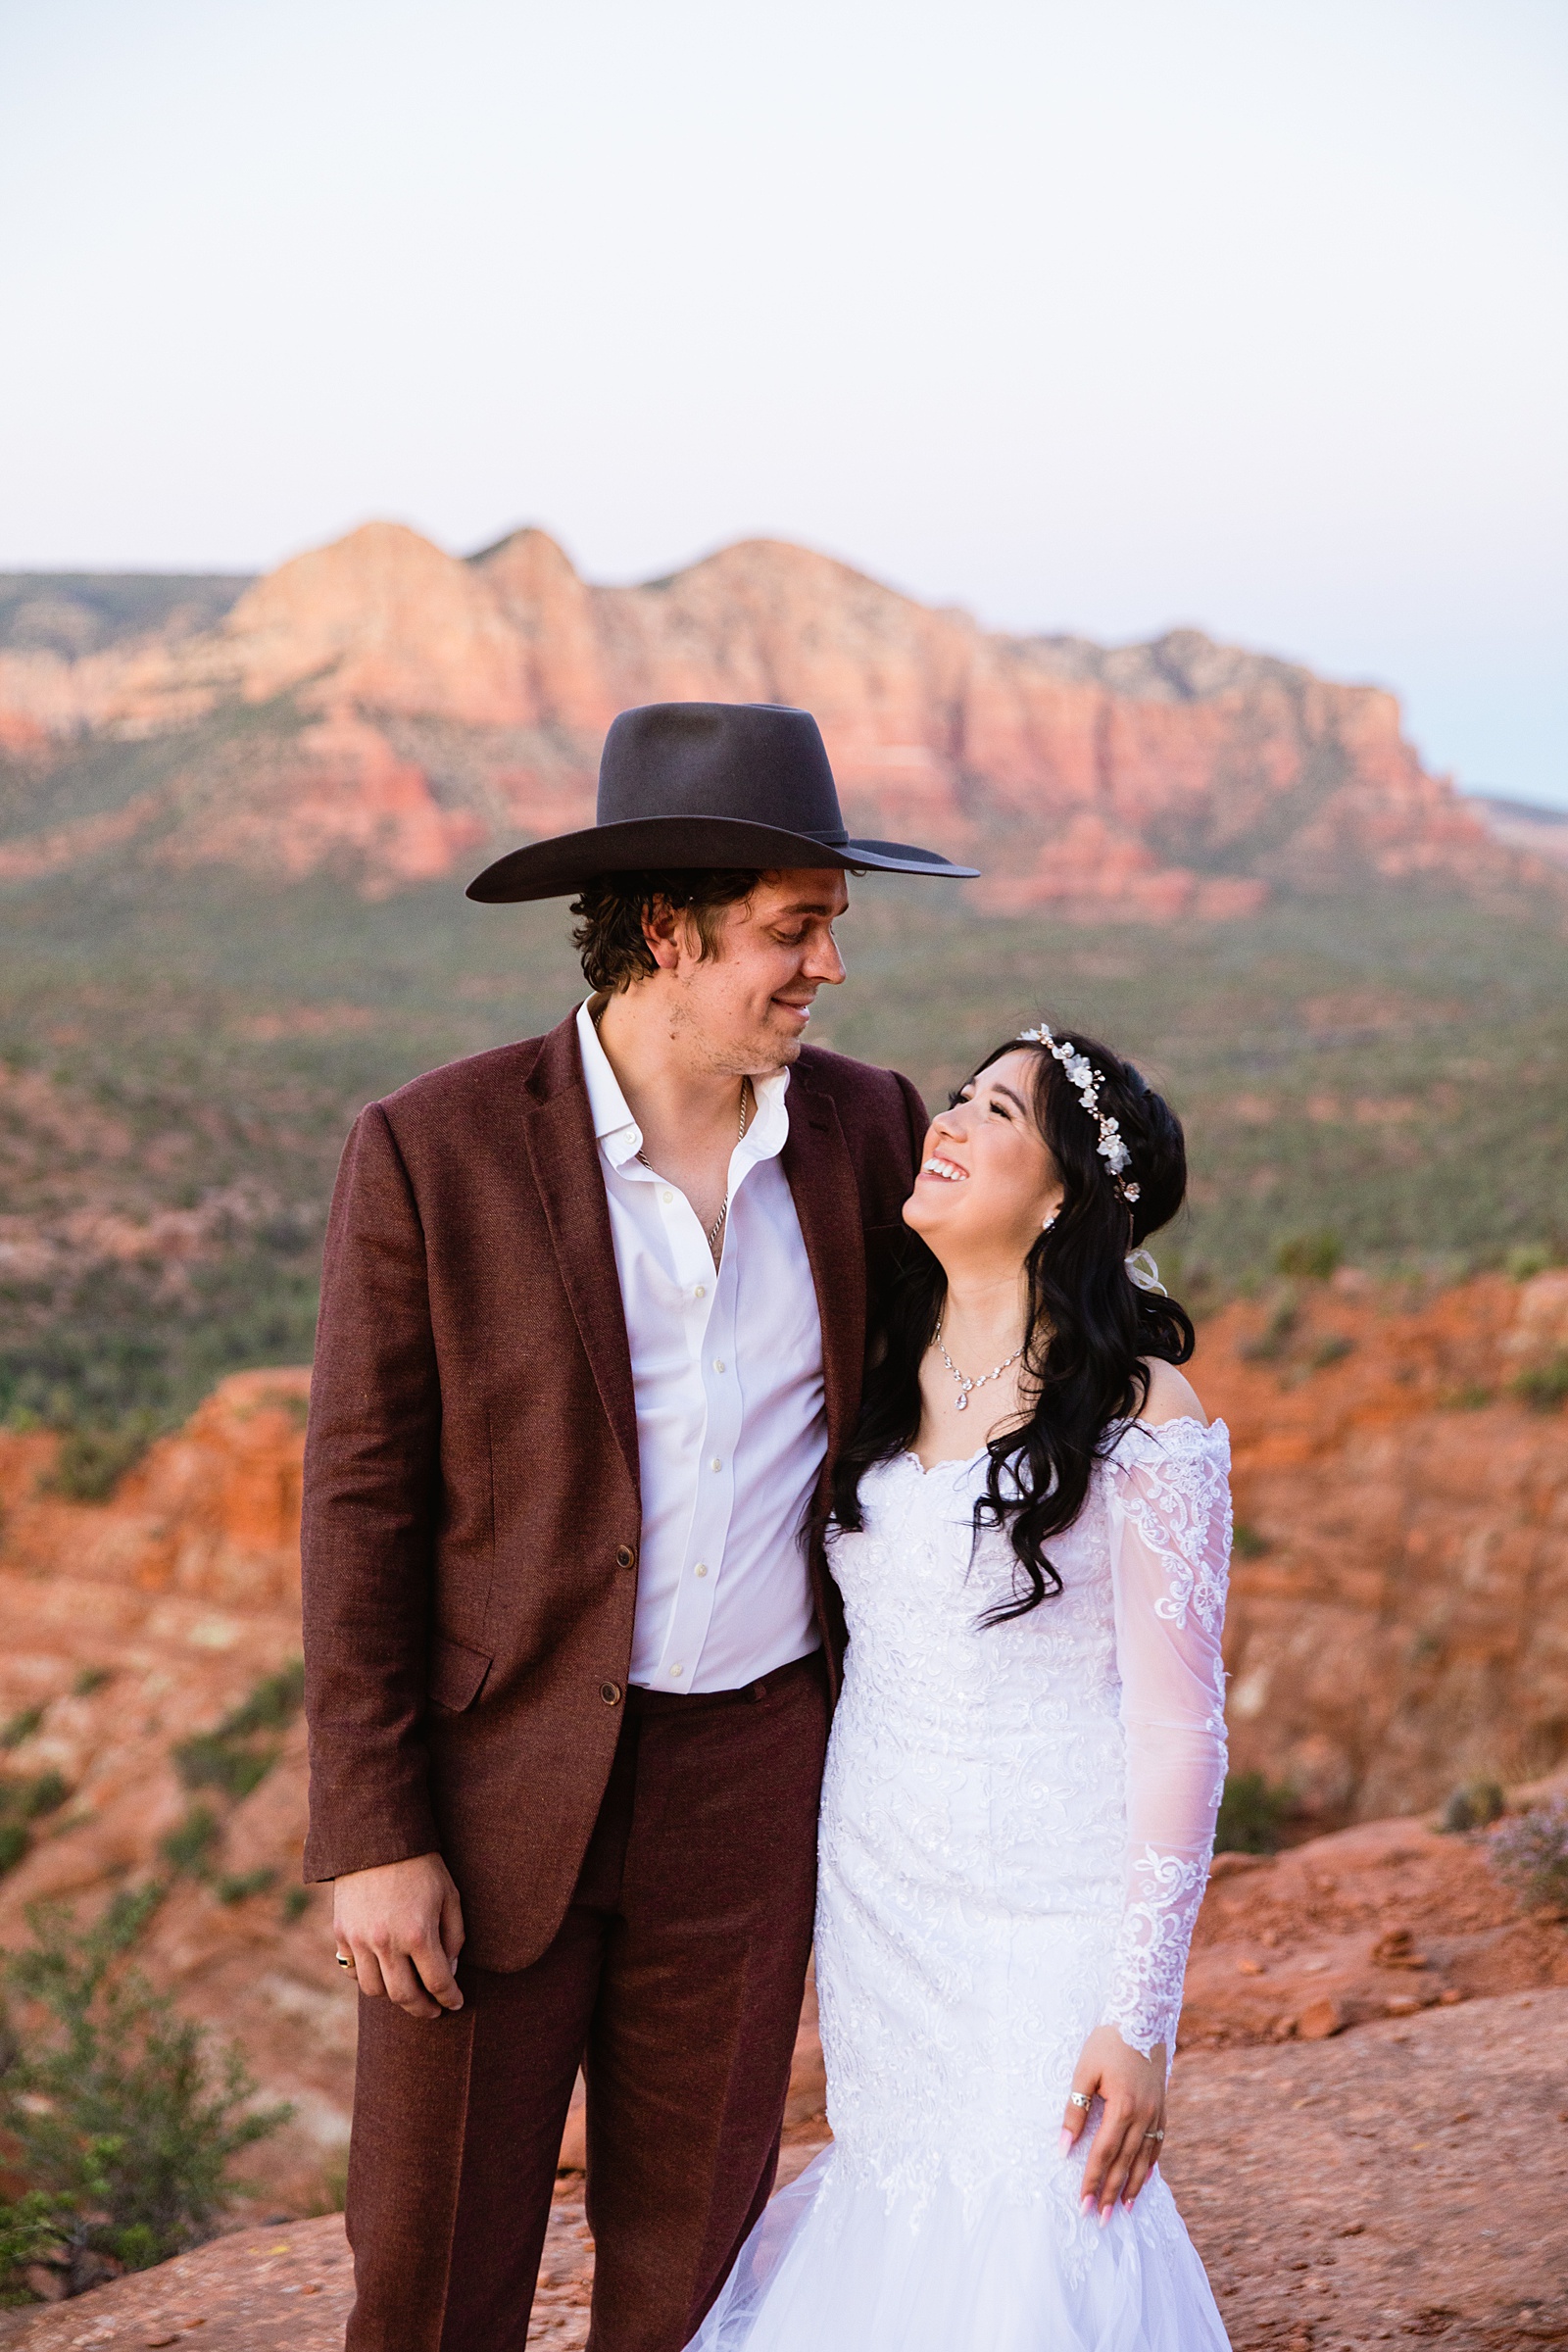 Bride and Groom laughing together during their Cathedral Rock elopement by Sedona elopement photographer PMA Photography.